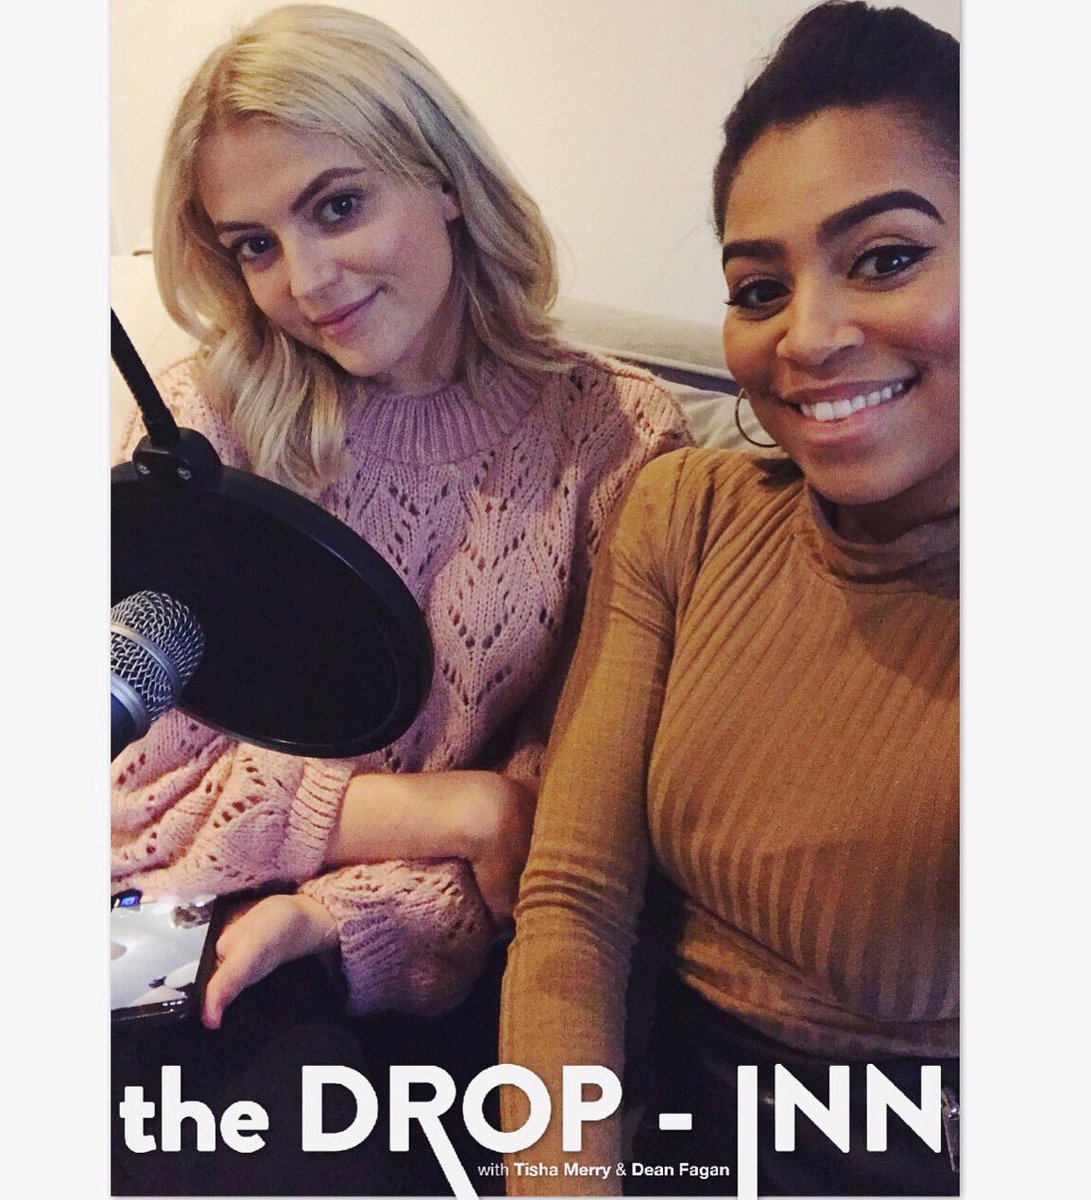 We can’t wait for you guys to hear this week’s episode! We’re joined by Actress Lucy Fallon!! The girls get personal and reveal all with their 20s life lessons! Only one day to go!😆
@lufallon 
#girltalk #womenshealth #relationshipadvice #positivebodyimage #perfectimperfections